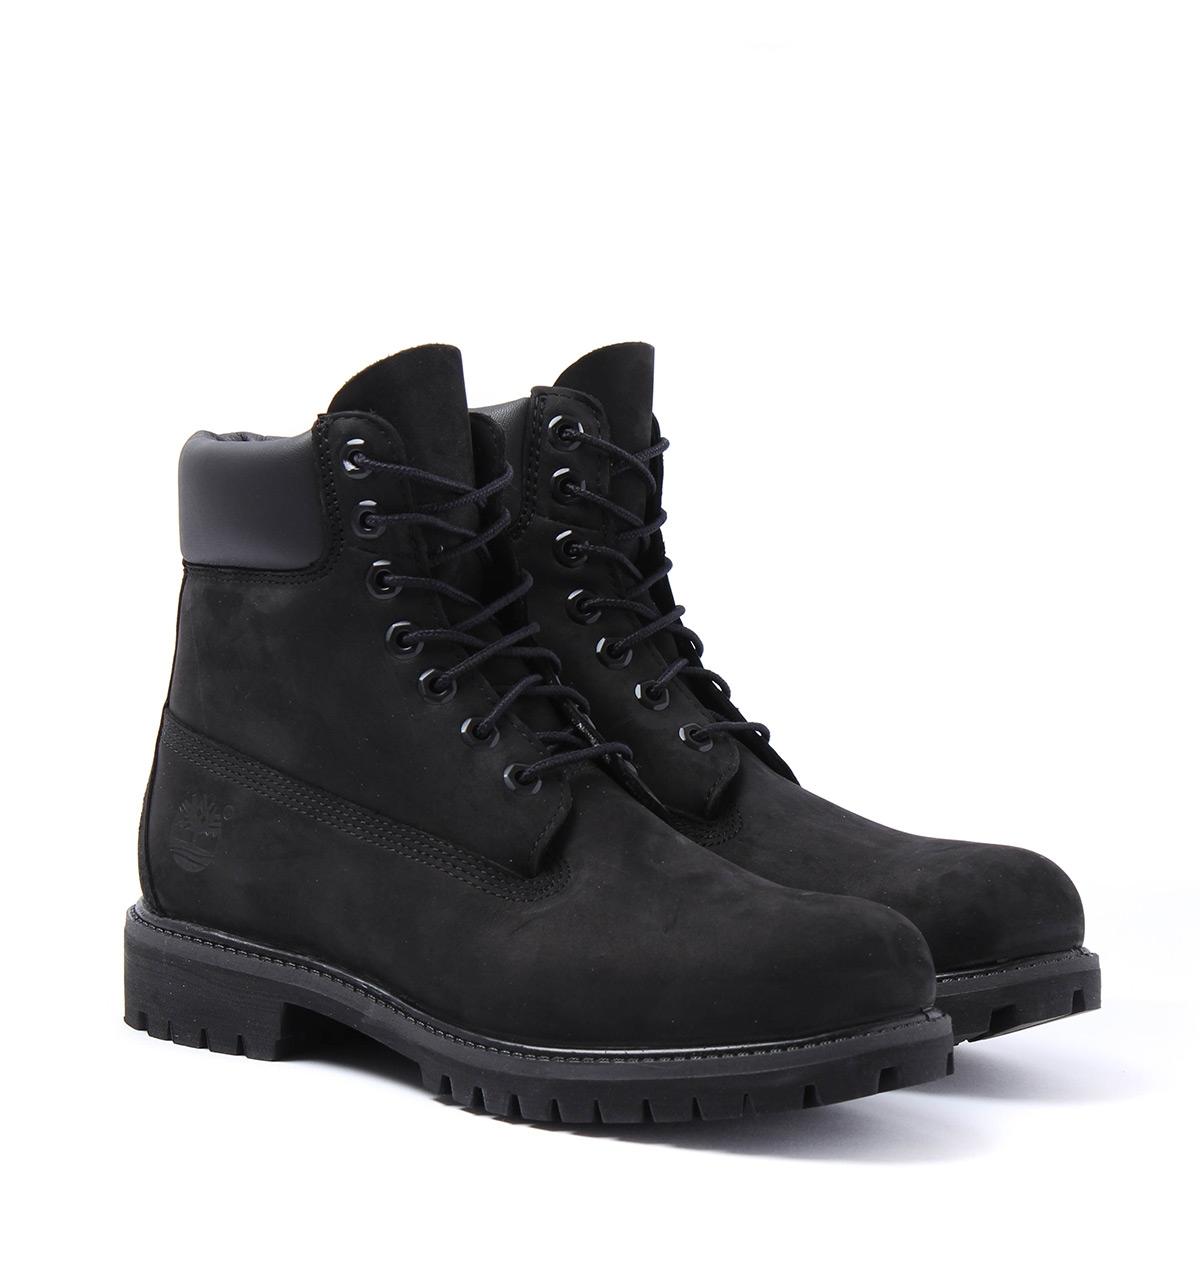 Timberland Leather Icon Black 6-inch Premium Wide Fit Boots for Men - Lyst